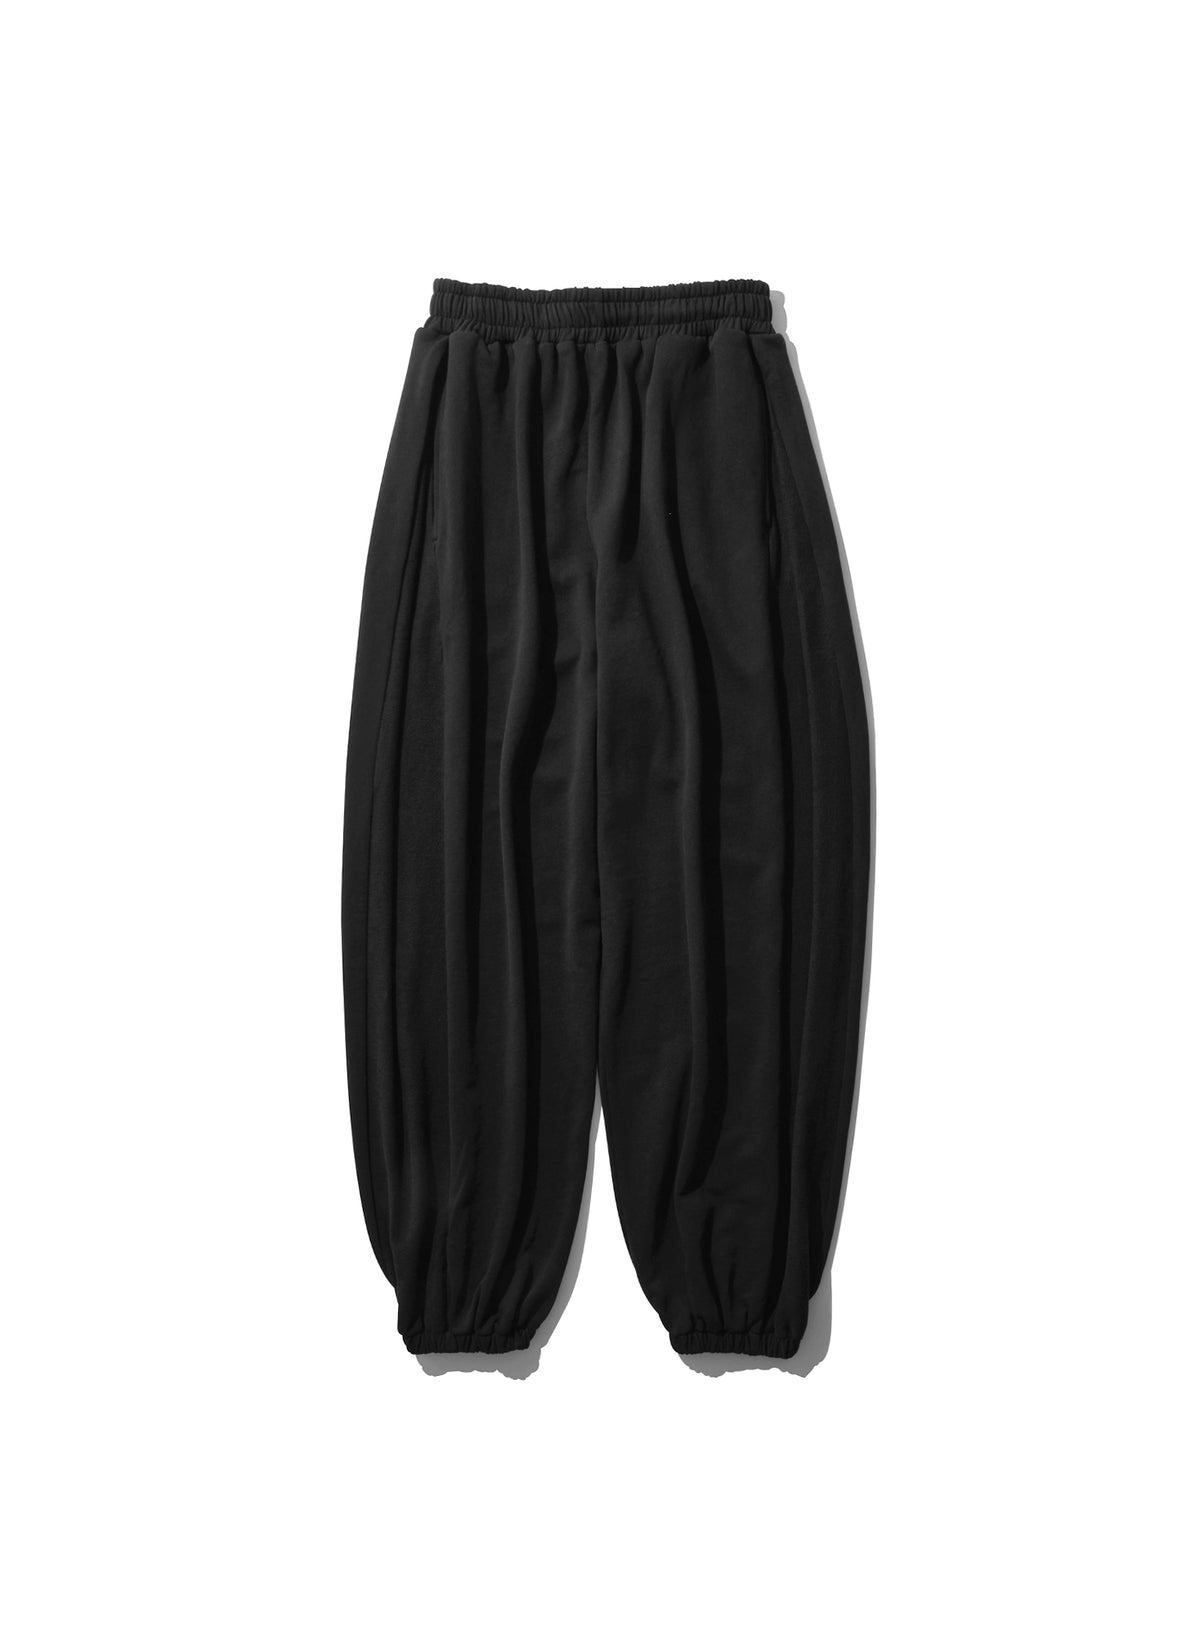 <span style="color: #f50b0b;">Last One</span> WILLY CHAVARRIA / GODZILLA BACK PANTS WILLY BLACK